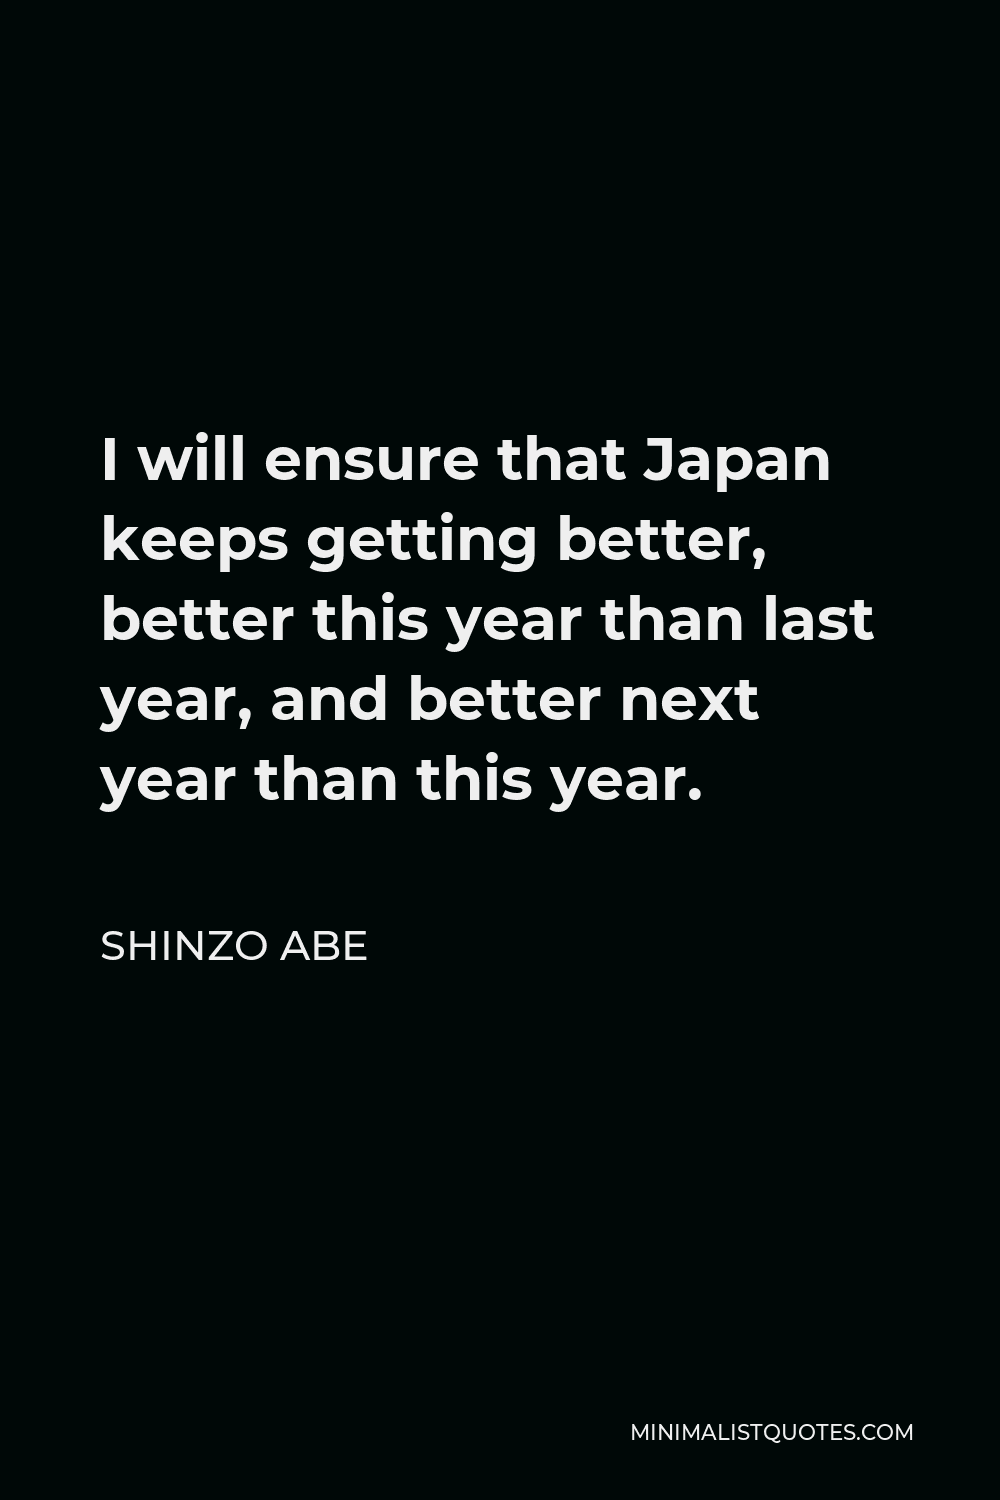 Shinzo Abe Quote - I will ensure that Japan keeps getting better, better this year than last year, and better next year than this year.